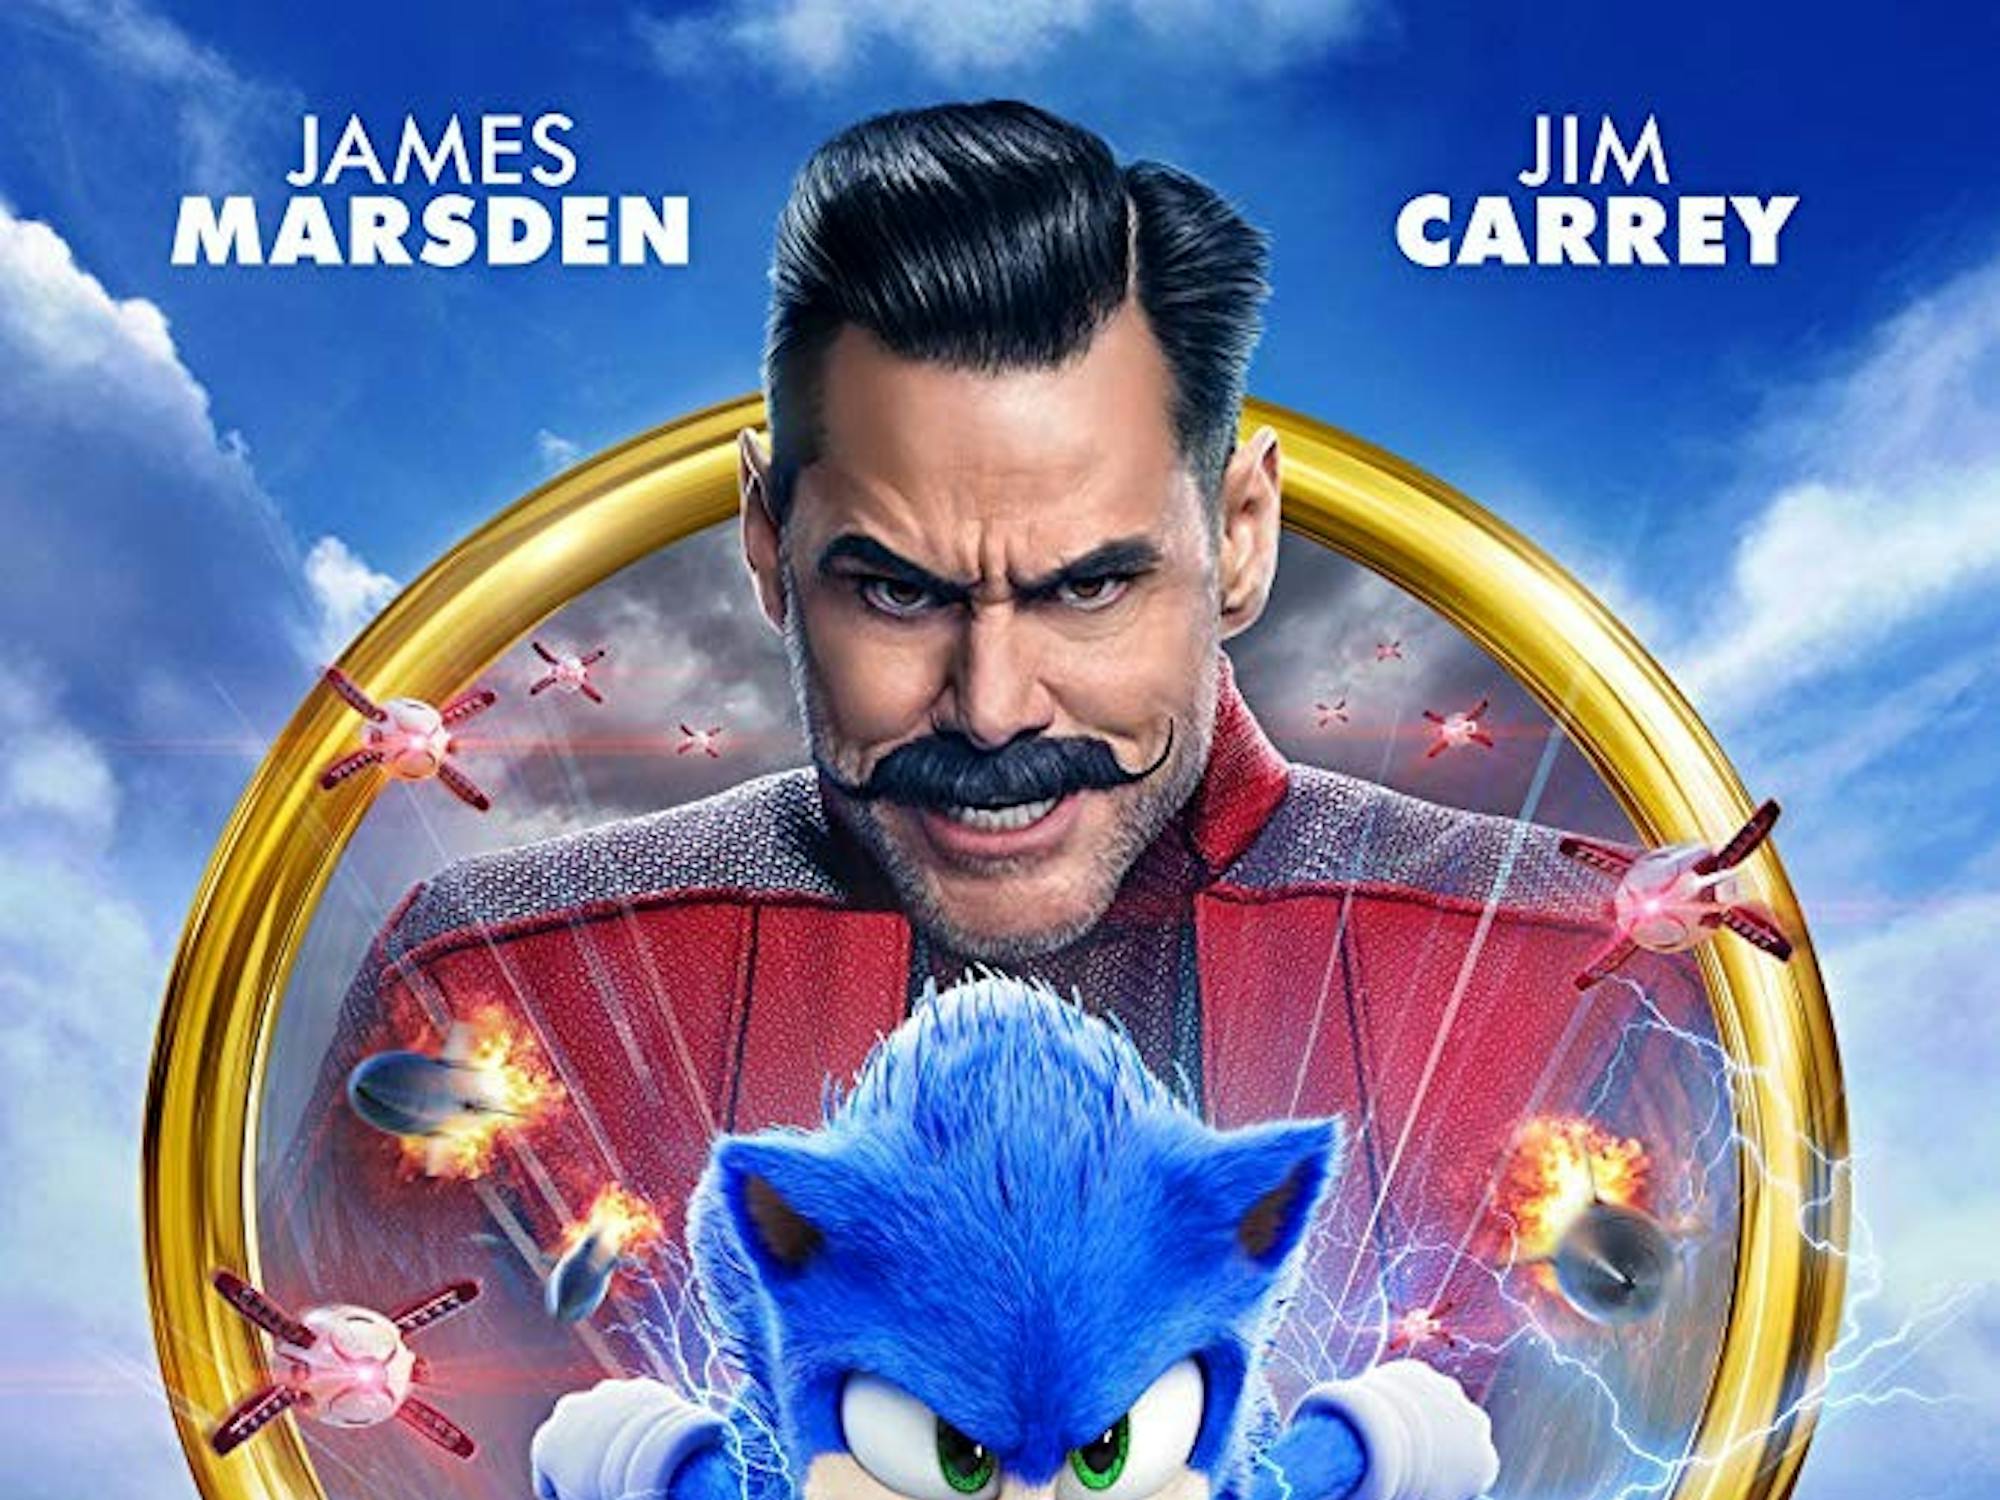 Sonic the Hedgehog Movie Poster